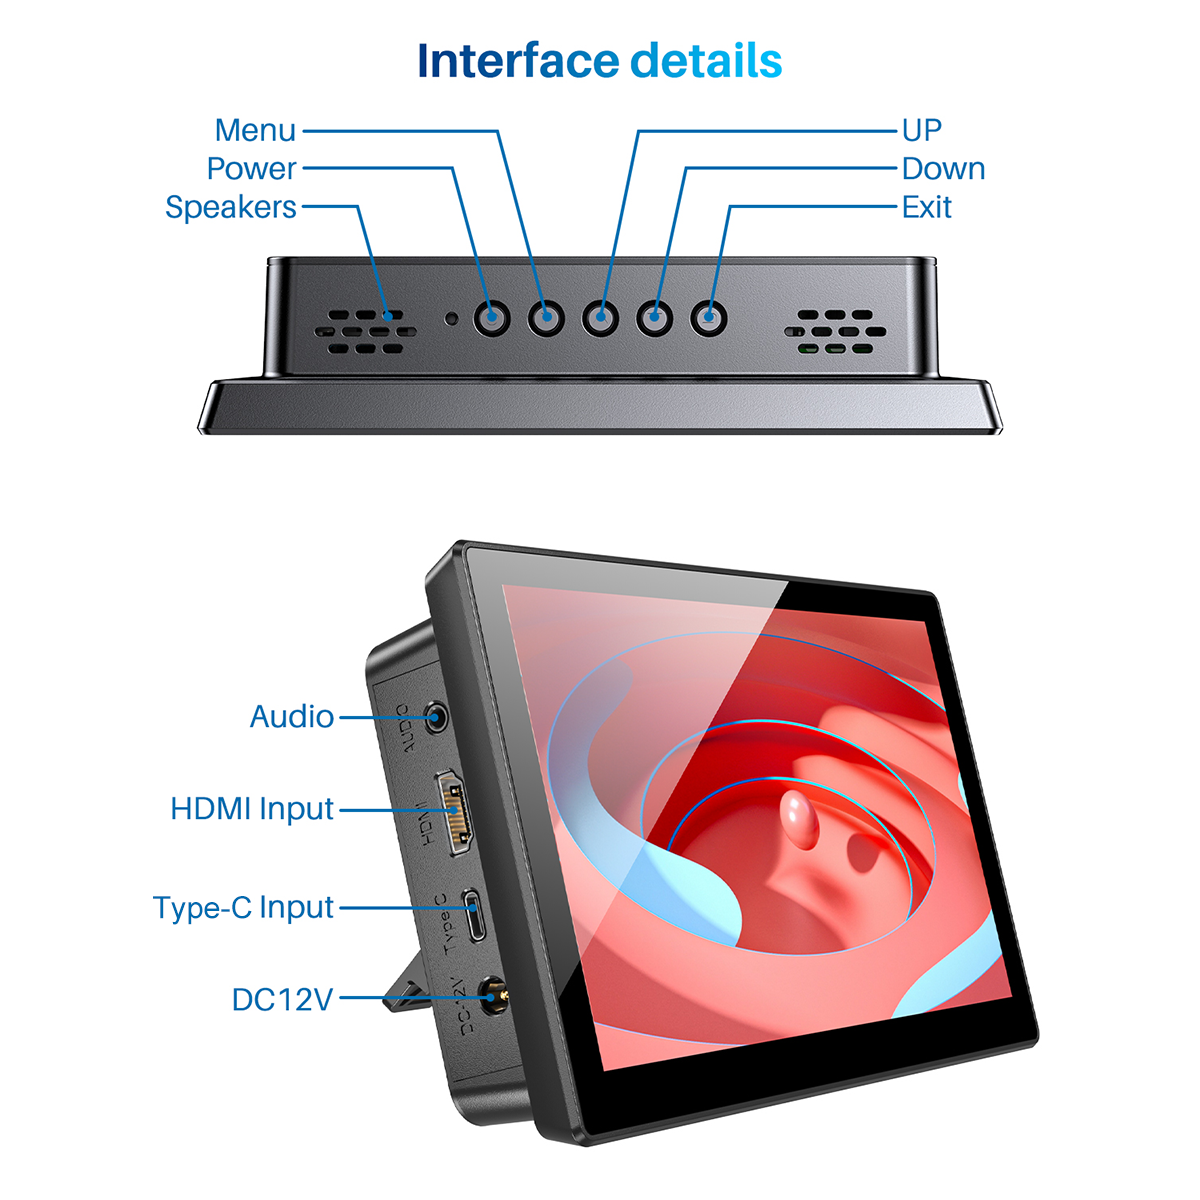 7 Inch Industrial Portable Monitor/Raspberry Pi Monitor/Quick-responsive Touchscreen/Support for HDMI and Type-C Display&USB touch